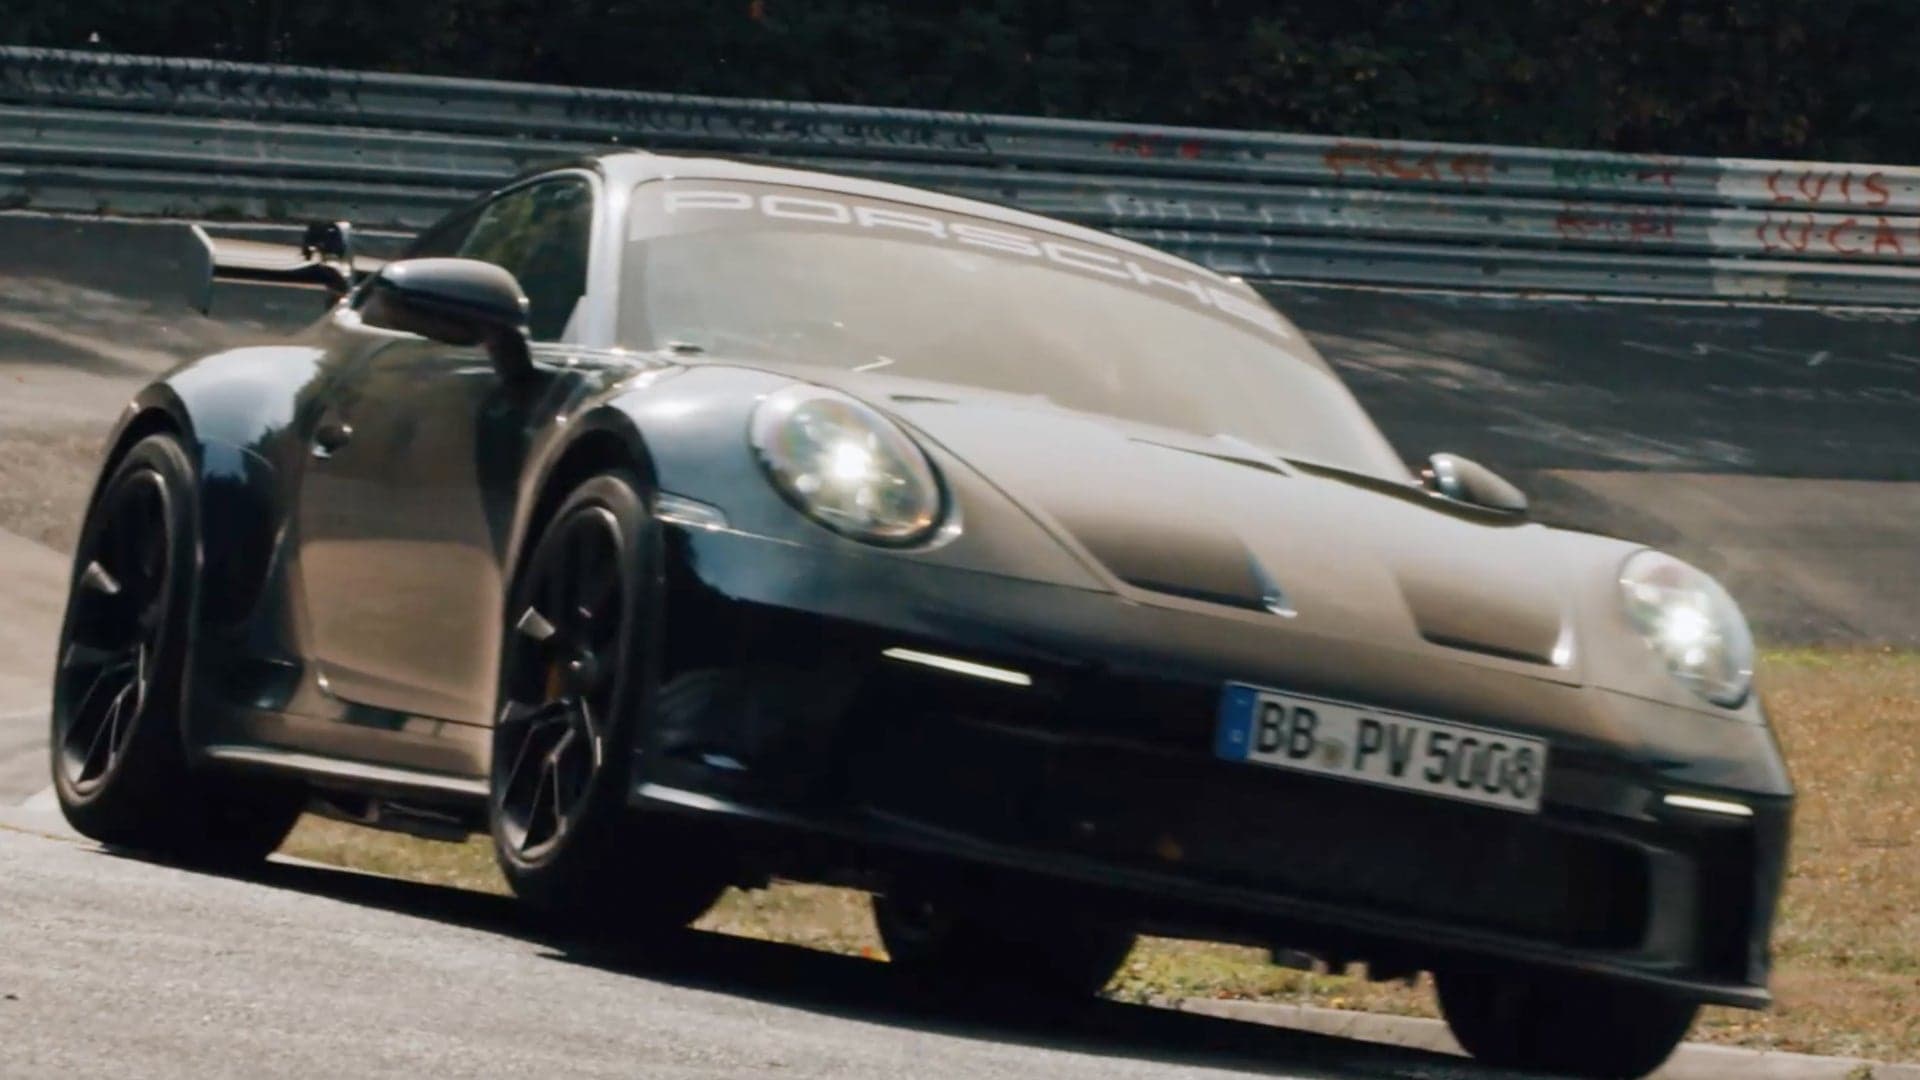 Listen to the New Porsche 911 GT3’s 9,000-RPM Flat-Six Sing As It Laps the Nurburgring